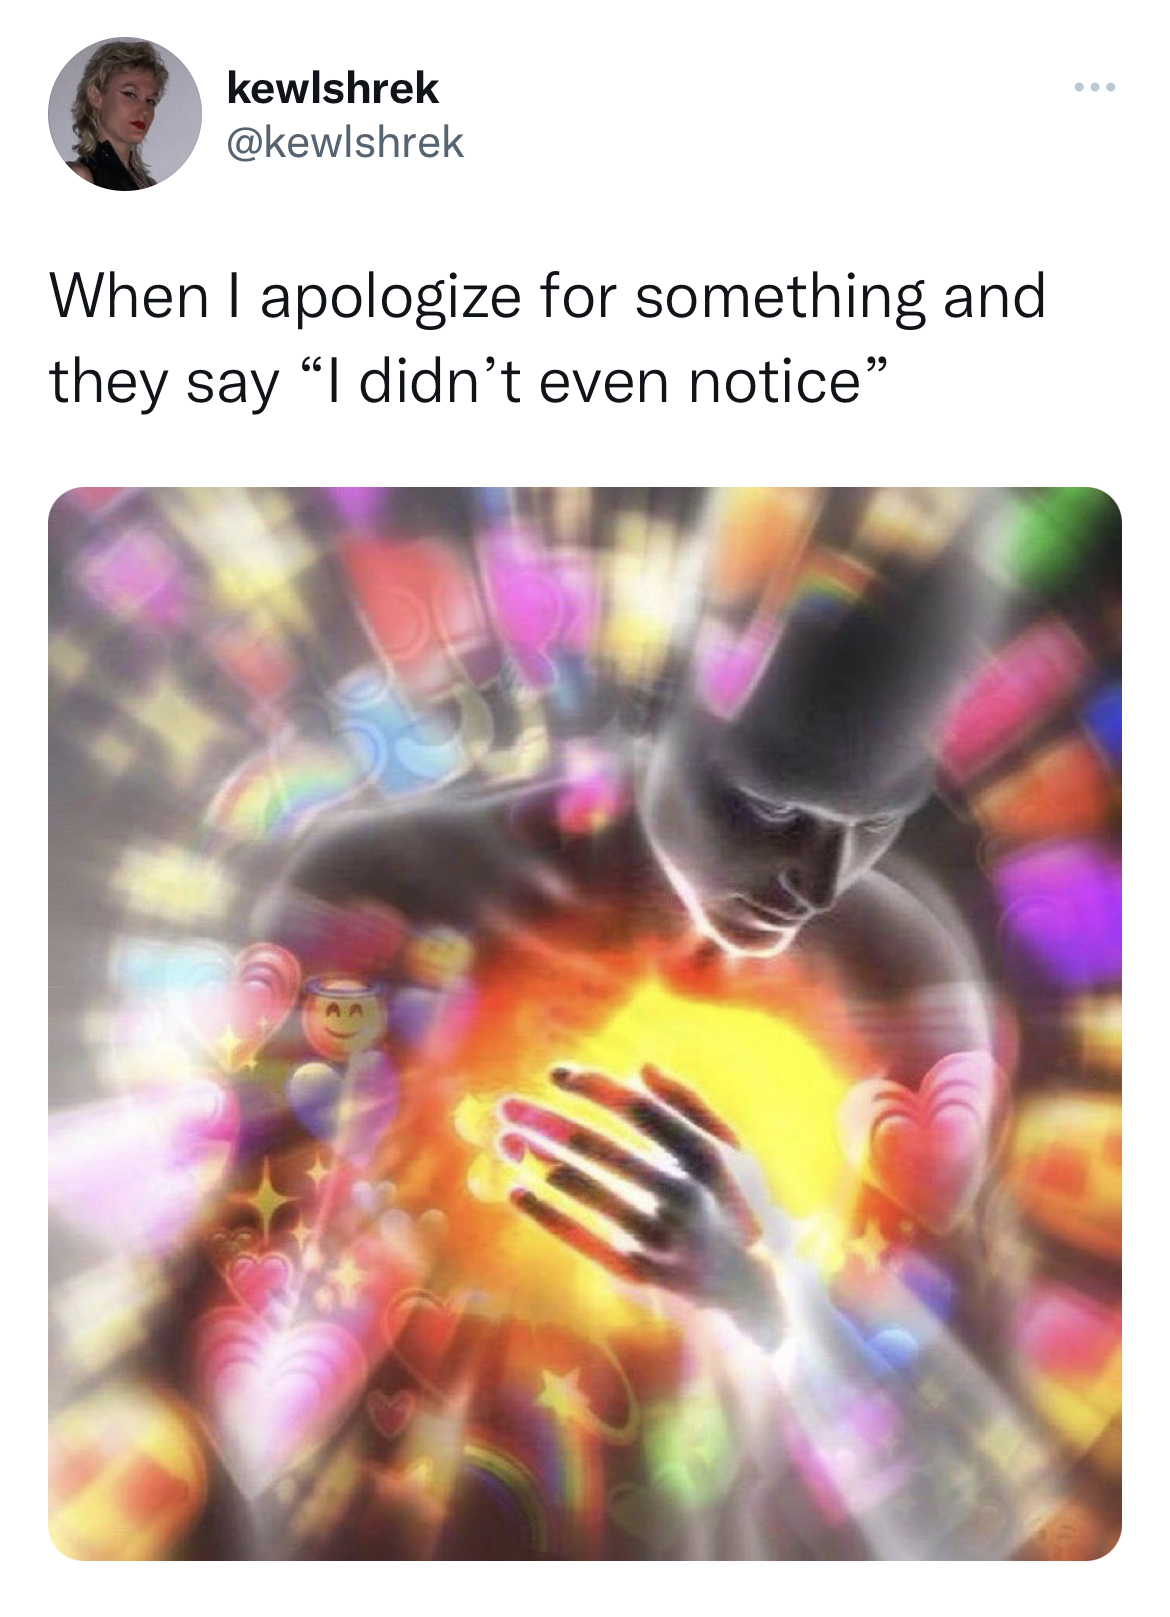 savage tweets to start the week - emoji heart attack meme - kewlshrek When I apologize for something and they say "I didn't even notice"